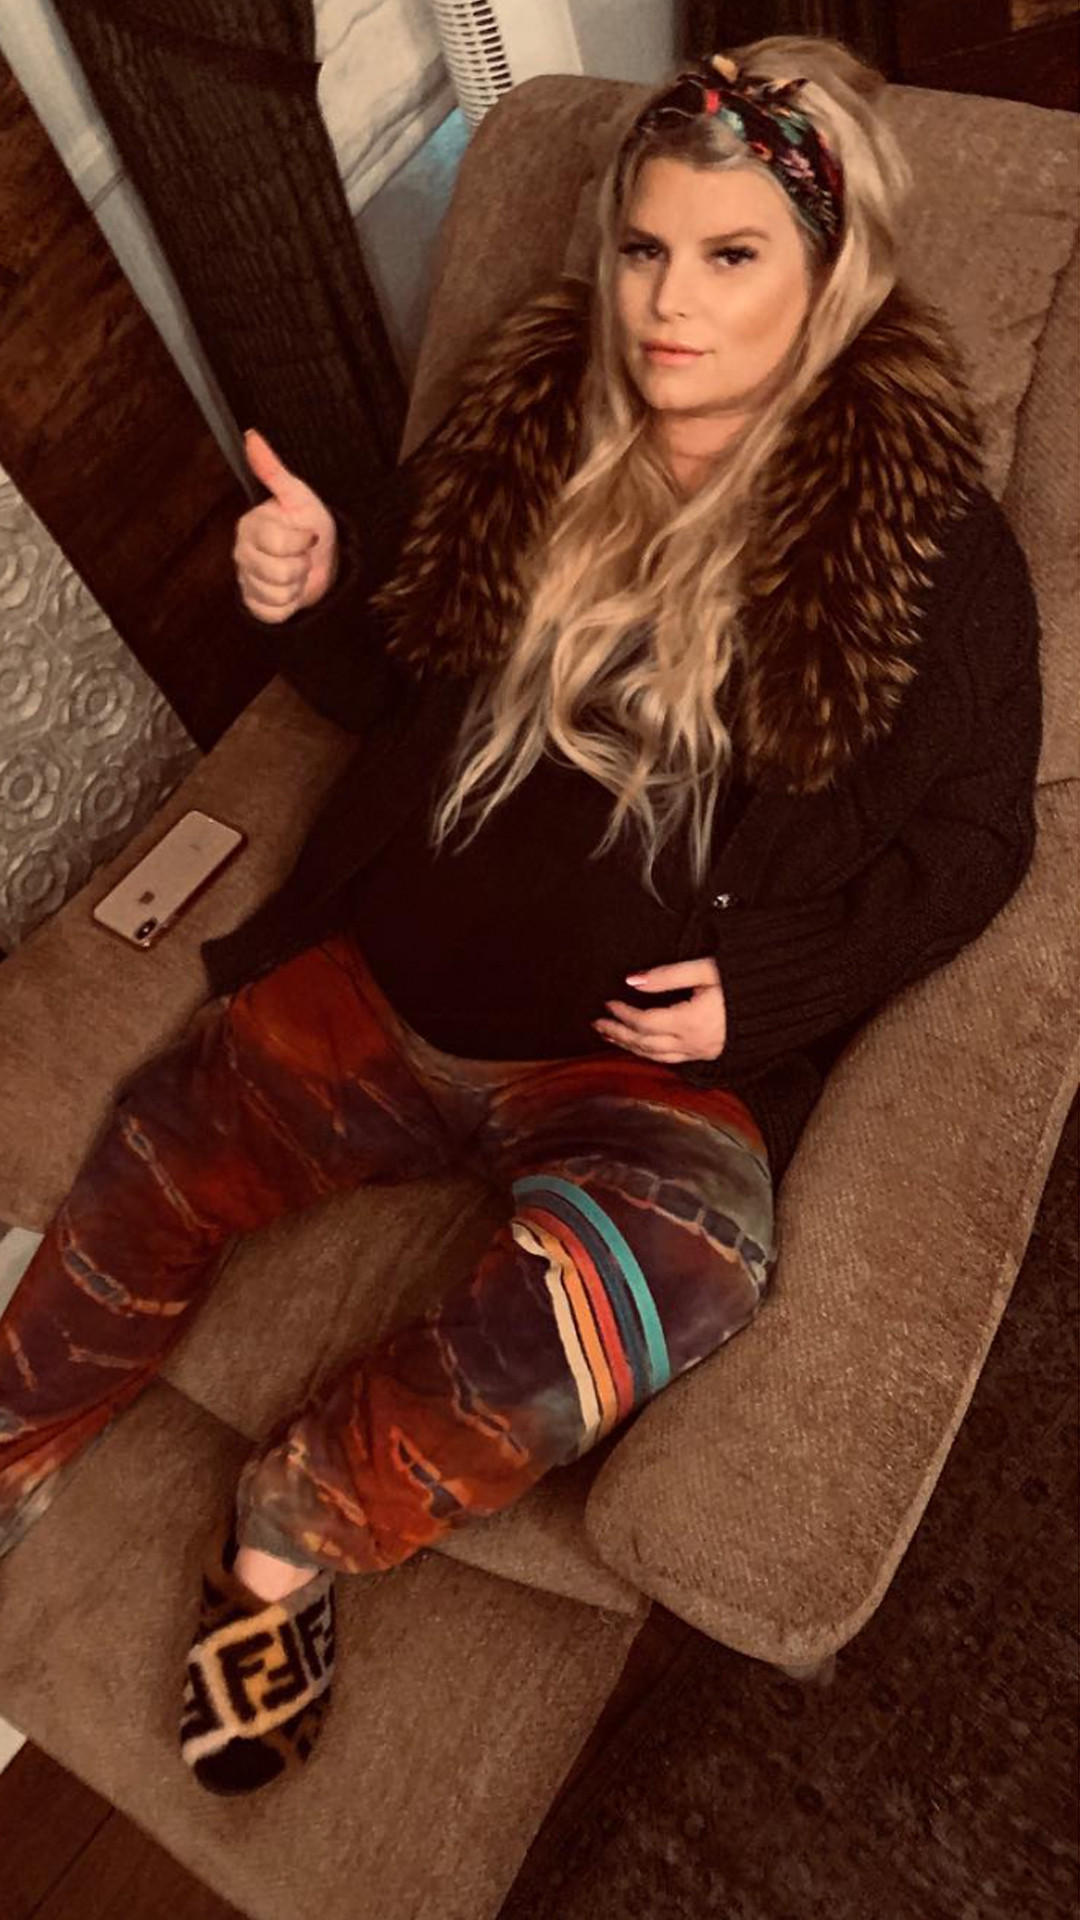 No Maternity Leather For Jessica! Simpson Shows Off Her Baby Bump